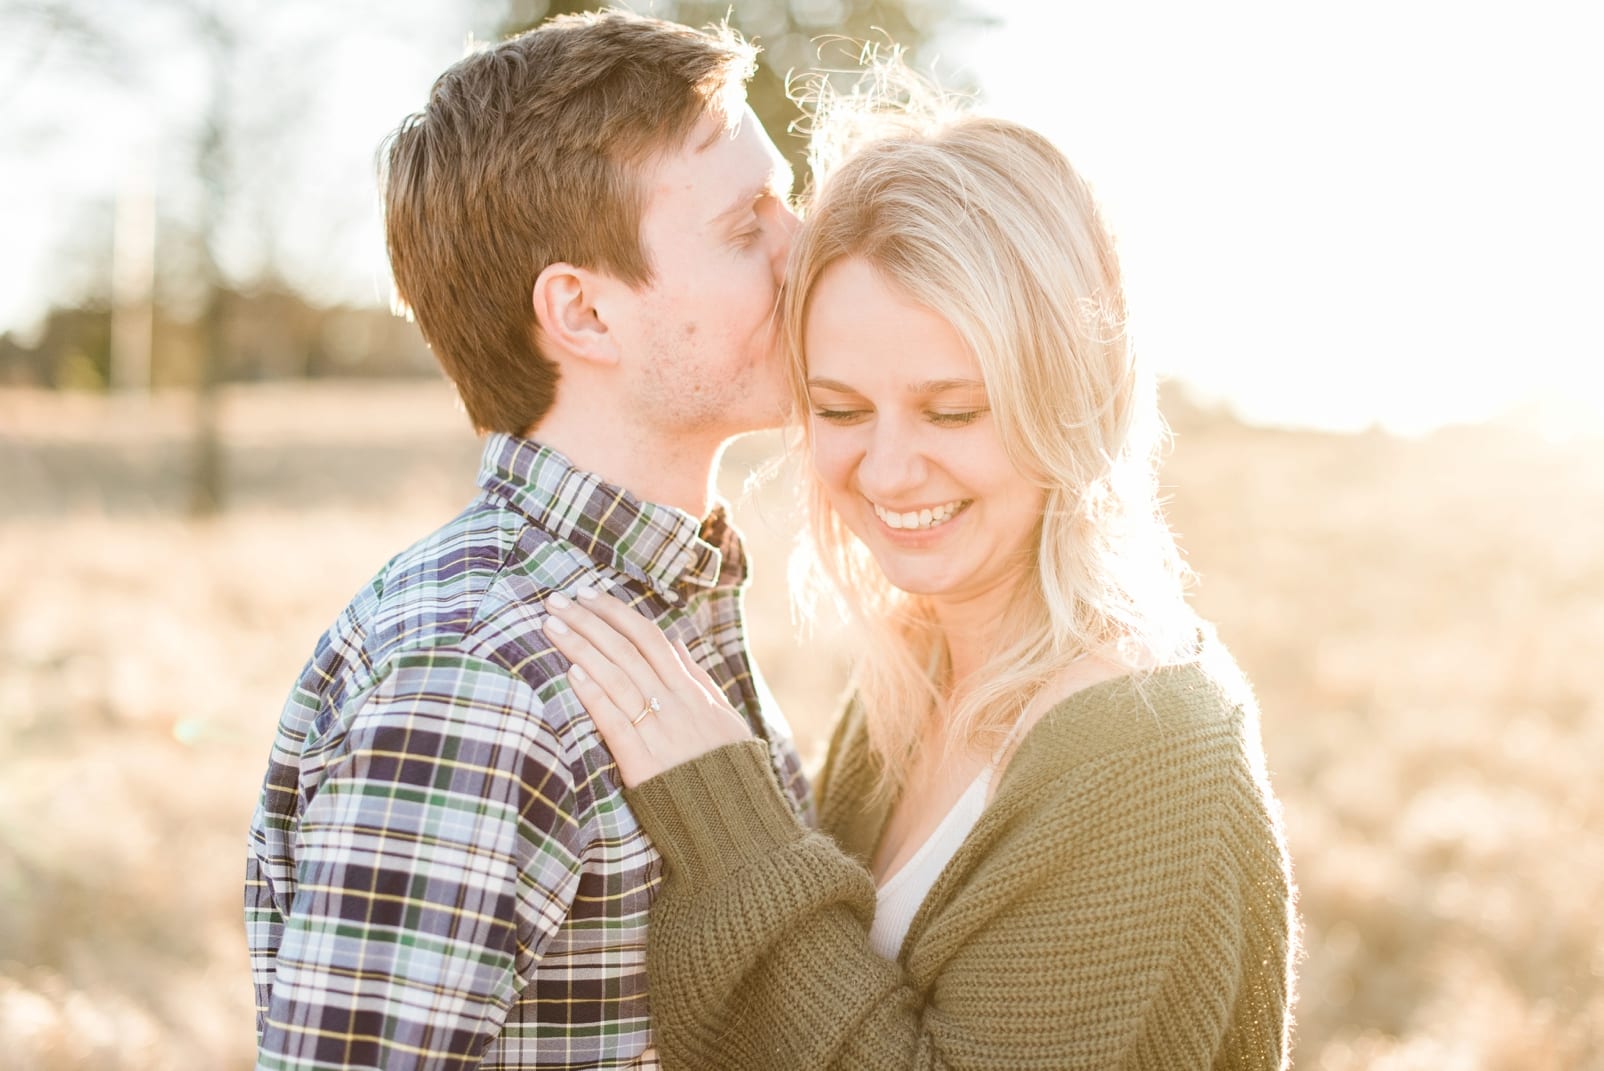 Raleigh groom kissing his bride on her hand during their engagement session photo